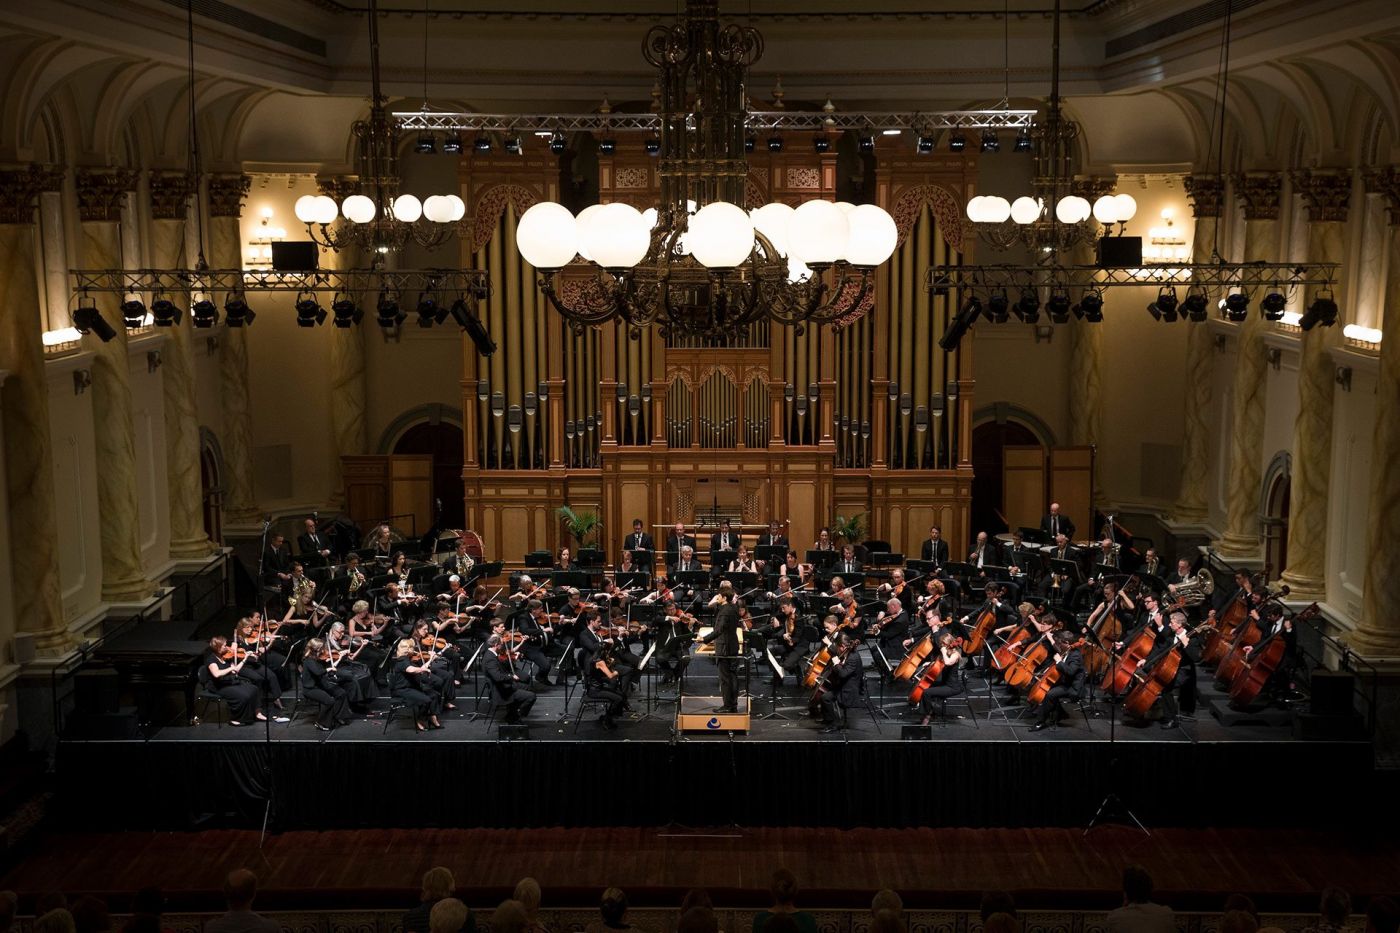 Adelaide Symphony Orchestra on stage at Adelaide Town Hall